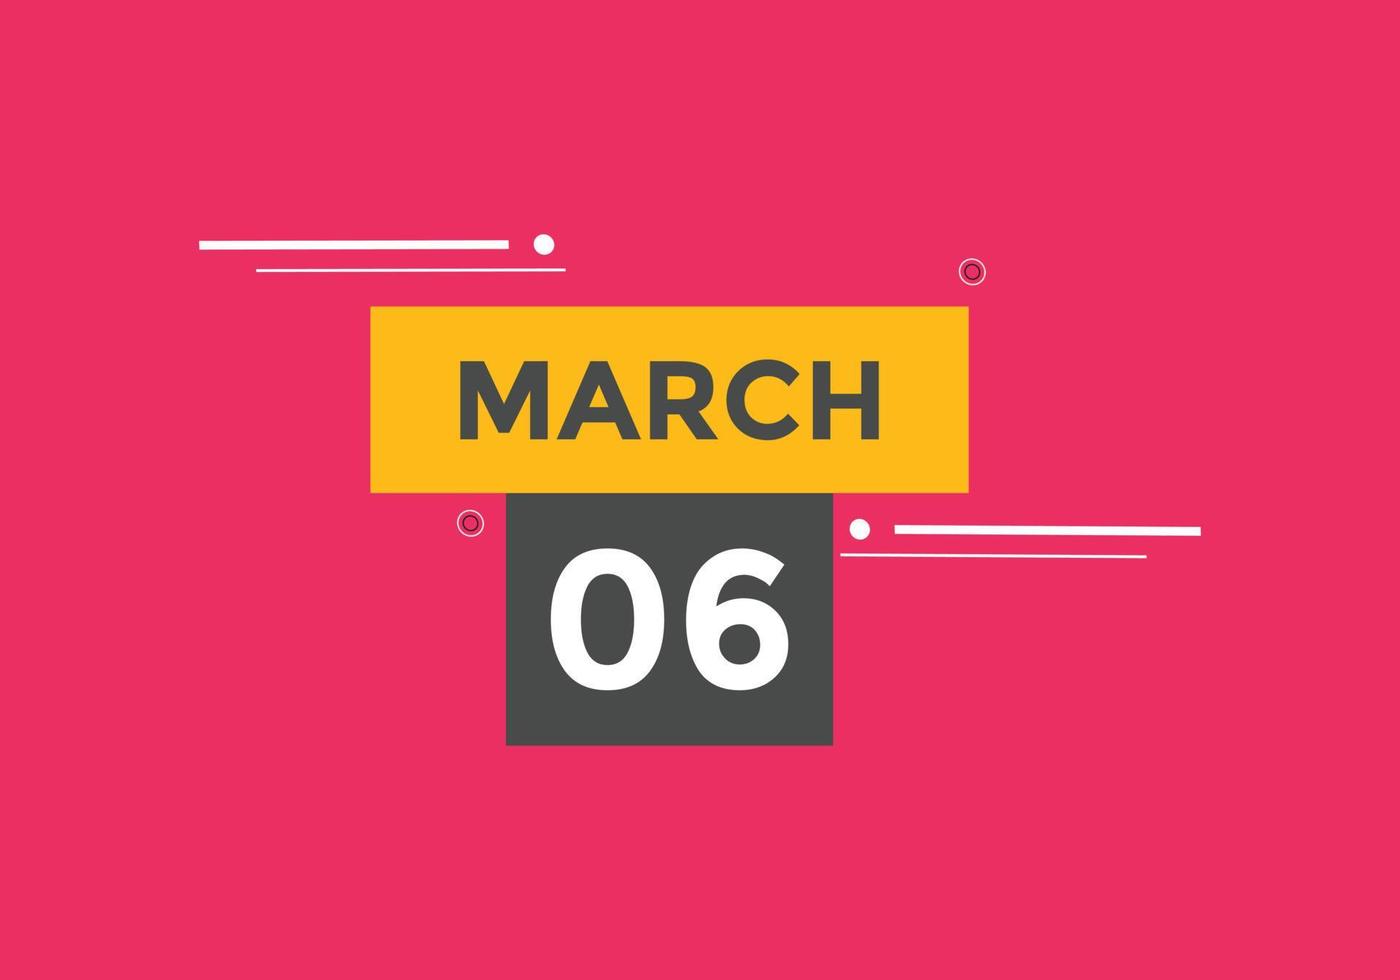 march 6 calendar reminder. 6th march daily calendar icon template. Calendar 6th march icon Design template. Vector illustration